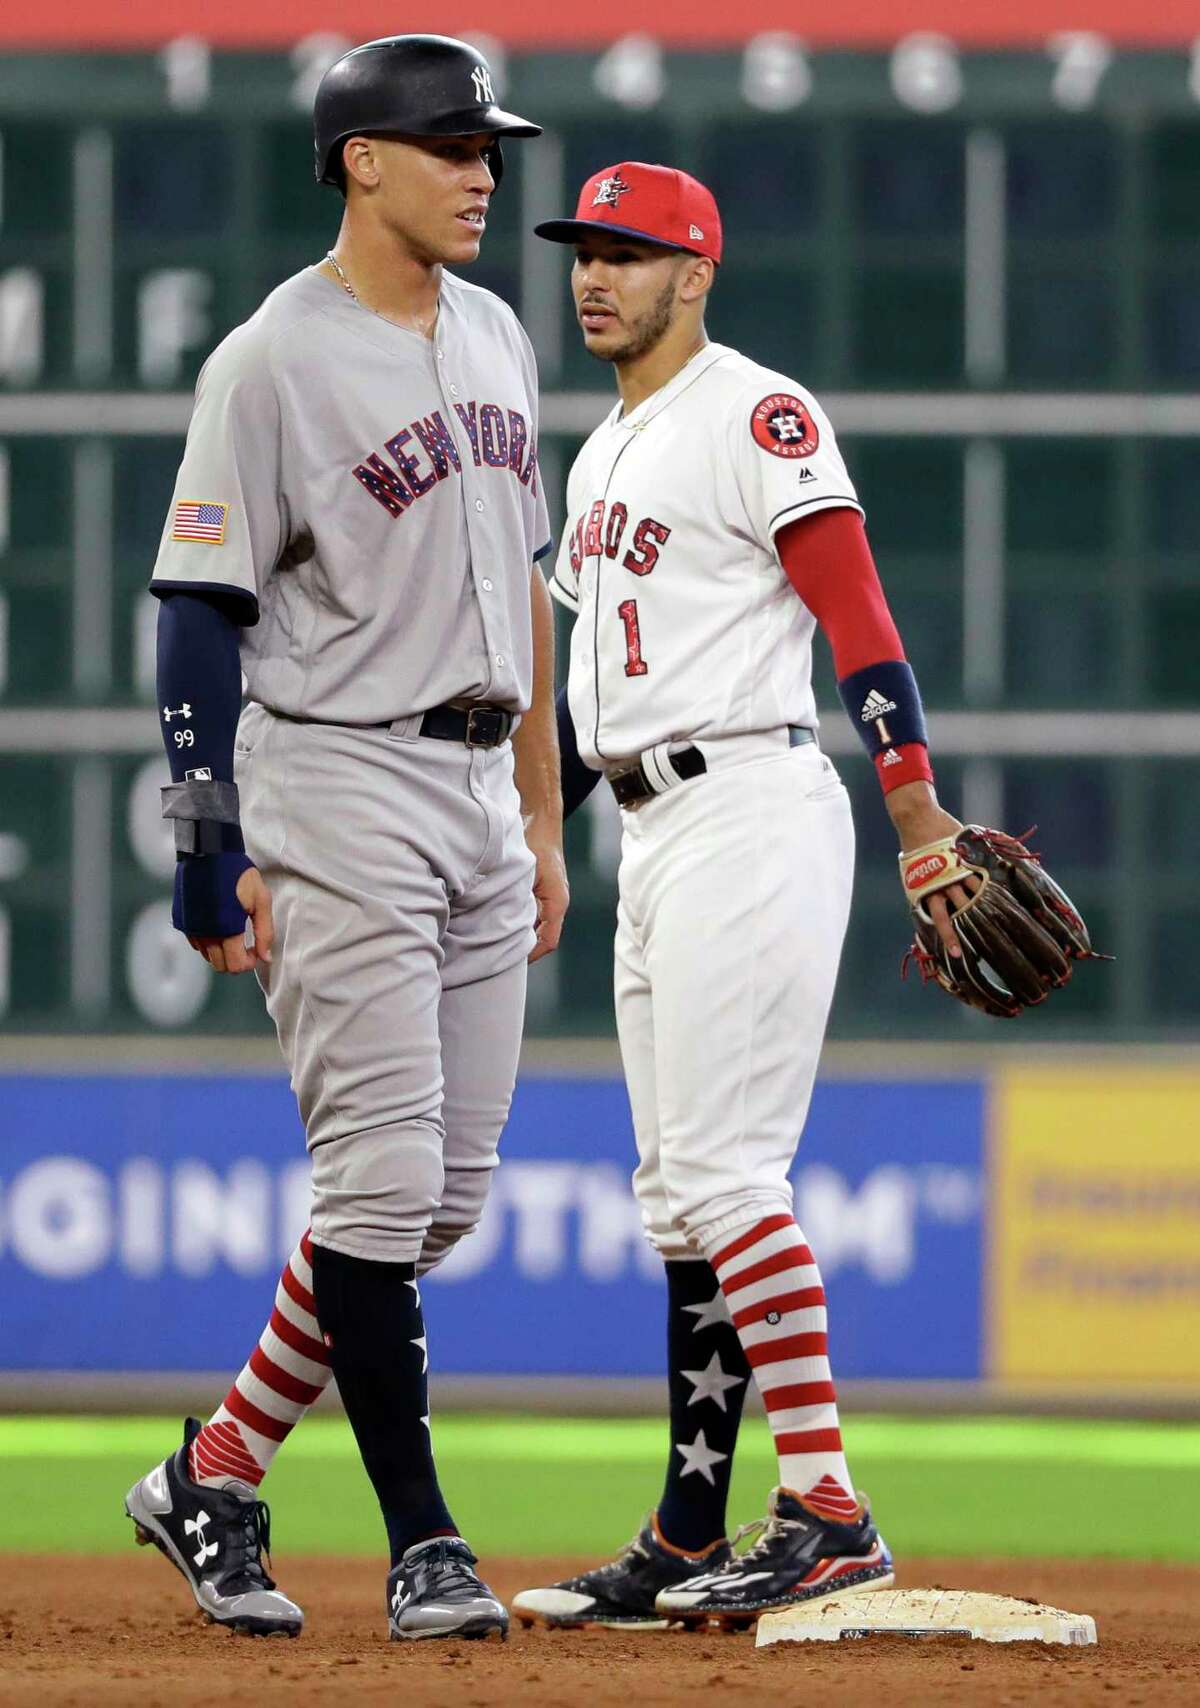 Houston Astros shortstop Carlos Correa (1) talks with New York Yankees' Aaron Judge during the eighth inning of a baseball game Sunday, July 2, 2017, in Houston. (AP Photo/David J. Phillip)